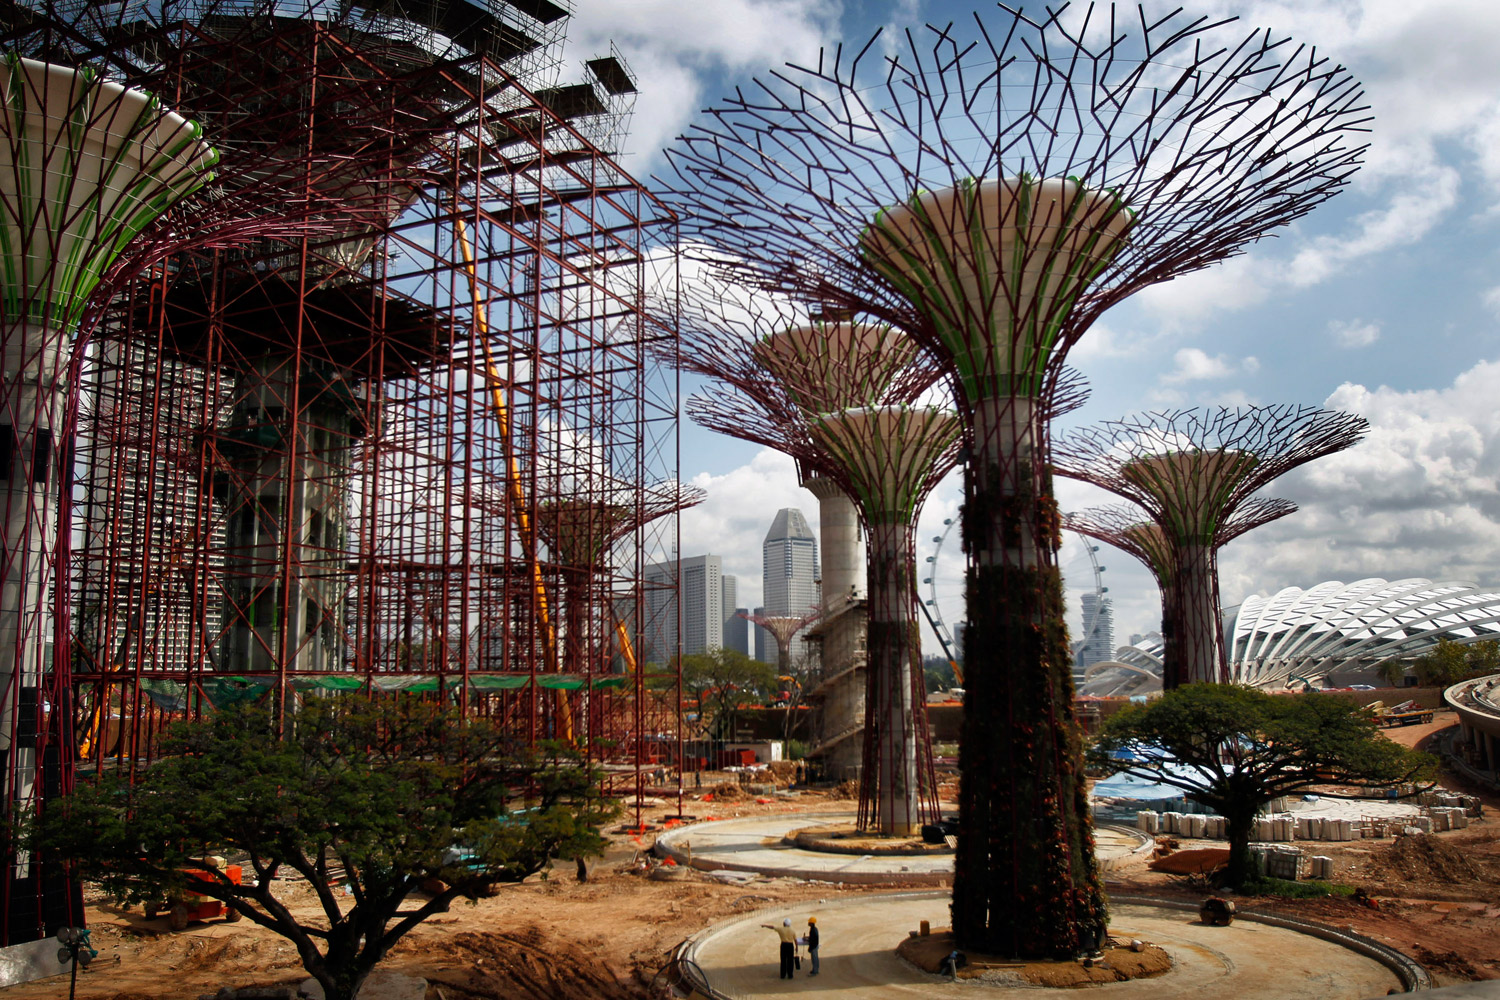 June 29, 2011. People are dwarfed by the structure of  Supertrees  seen against the financial skyline of Singapore. These  Supertrees  are vertical gardens, embedded with environmentally sustainable functions and range from 25-50-meters in height, and are part of the government's efforts to bring their national gardens into the city center.